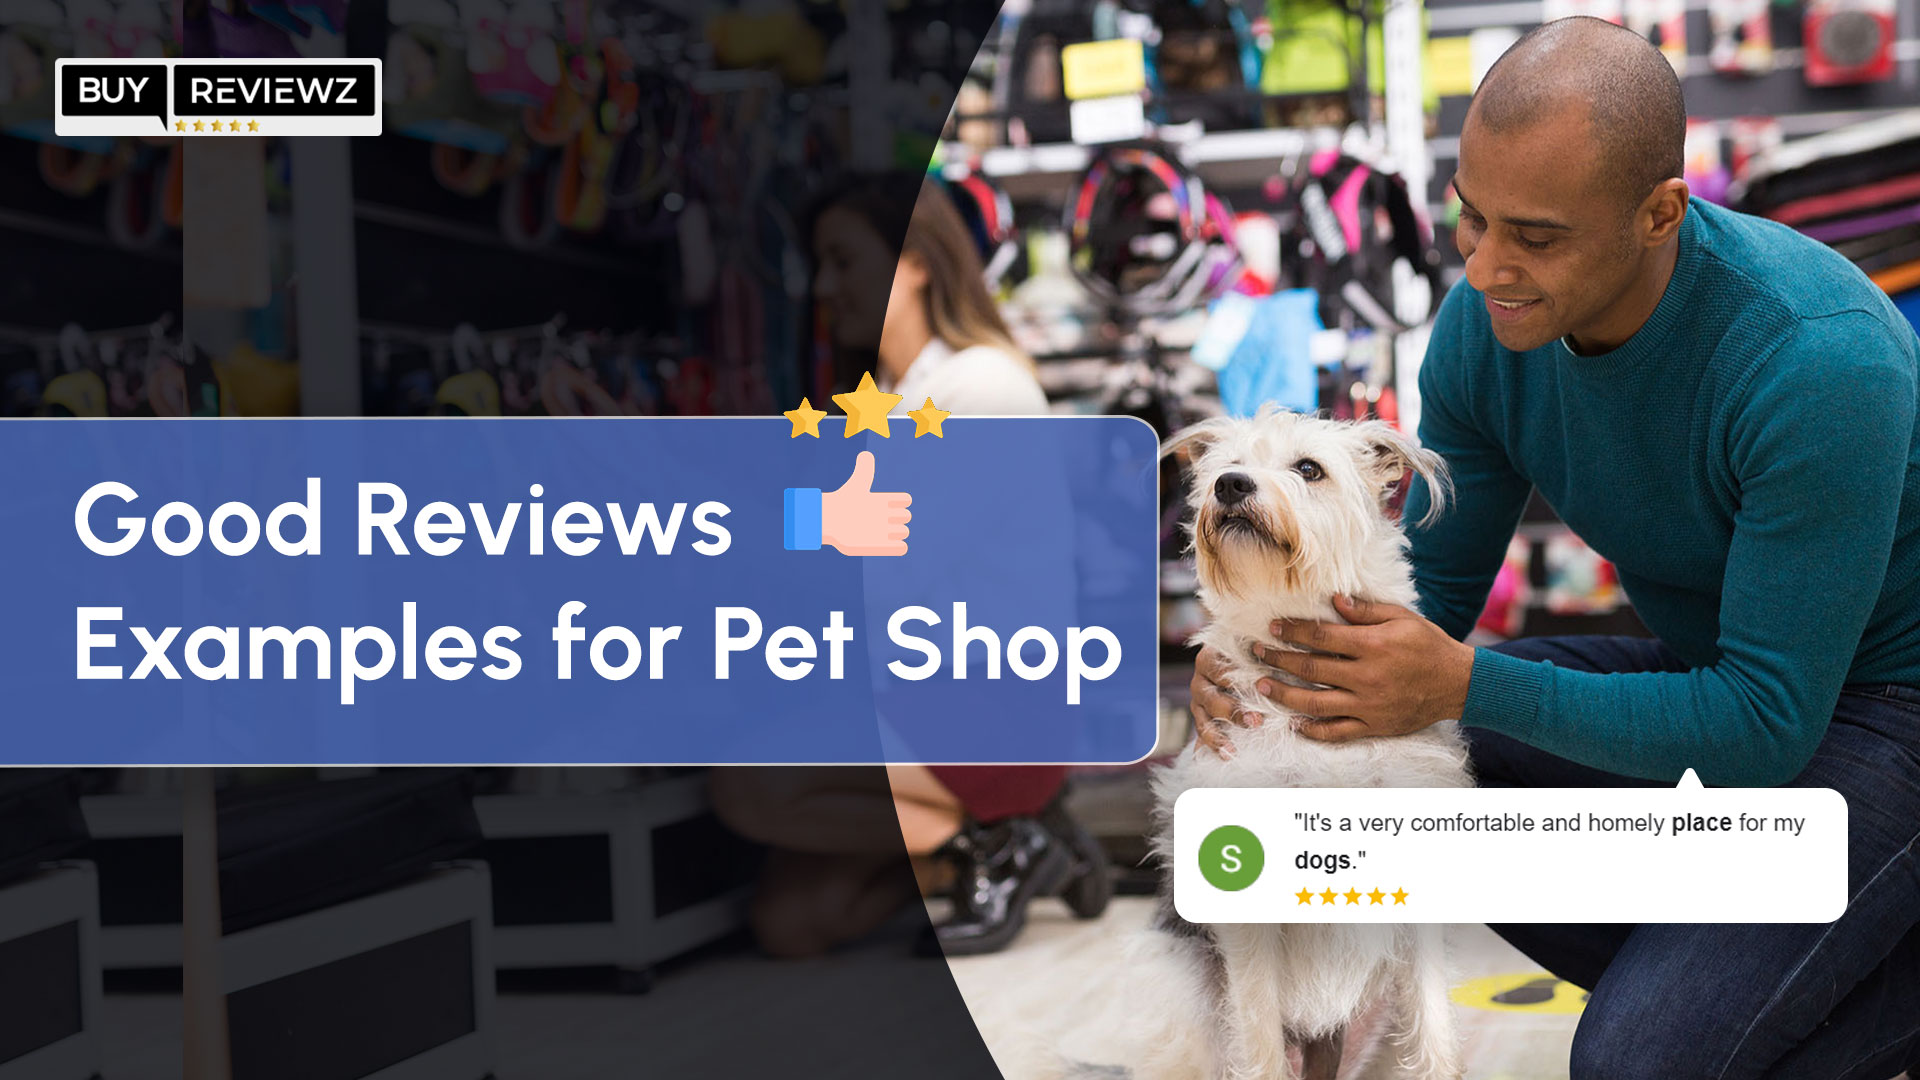 Good Reviews Examples for Pet Shop